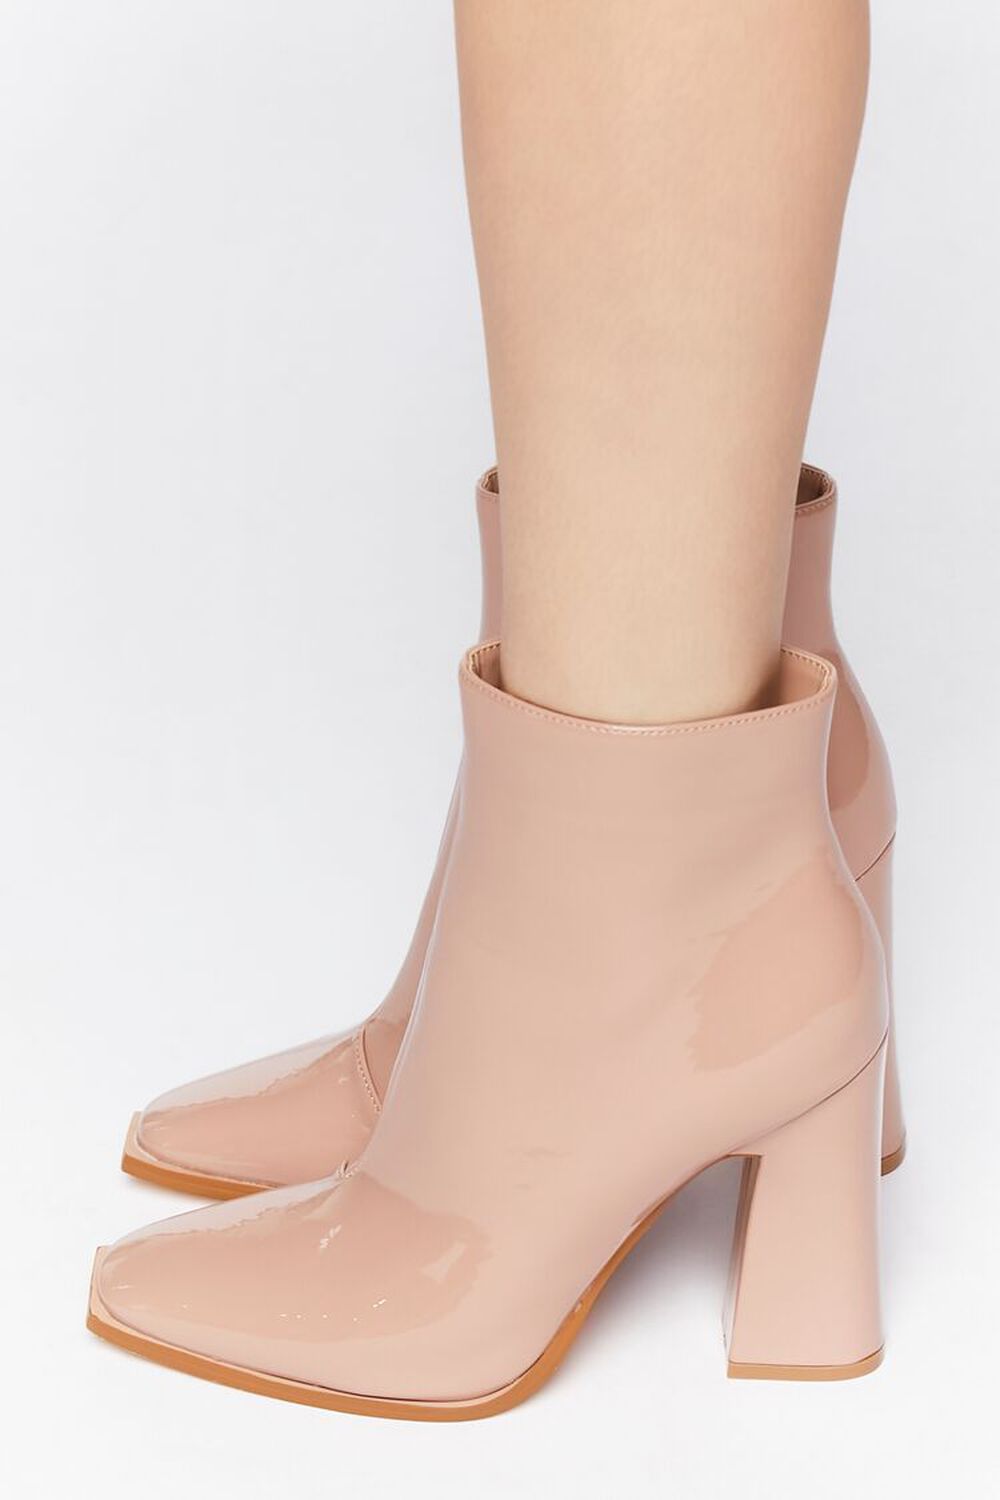 NUDE Faux Patent Leather Booties, image 2